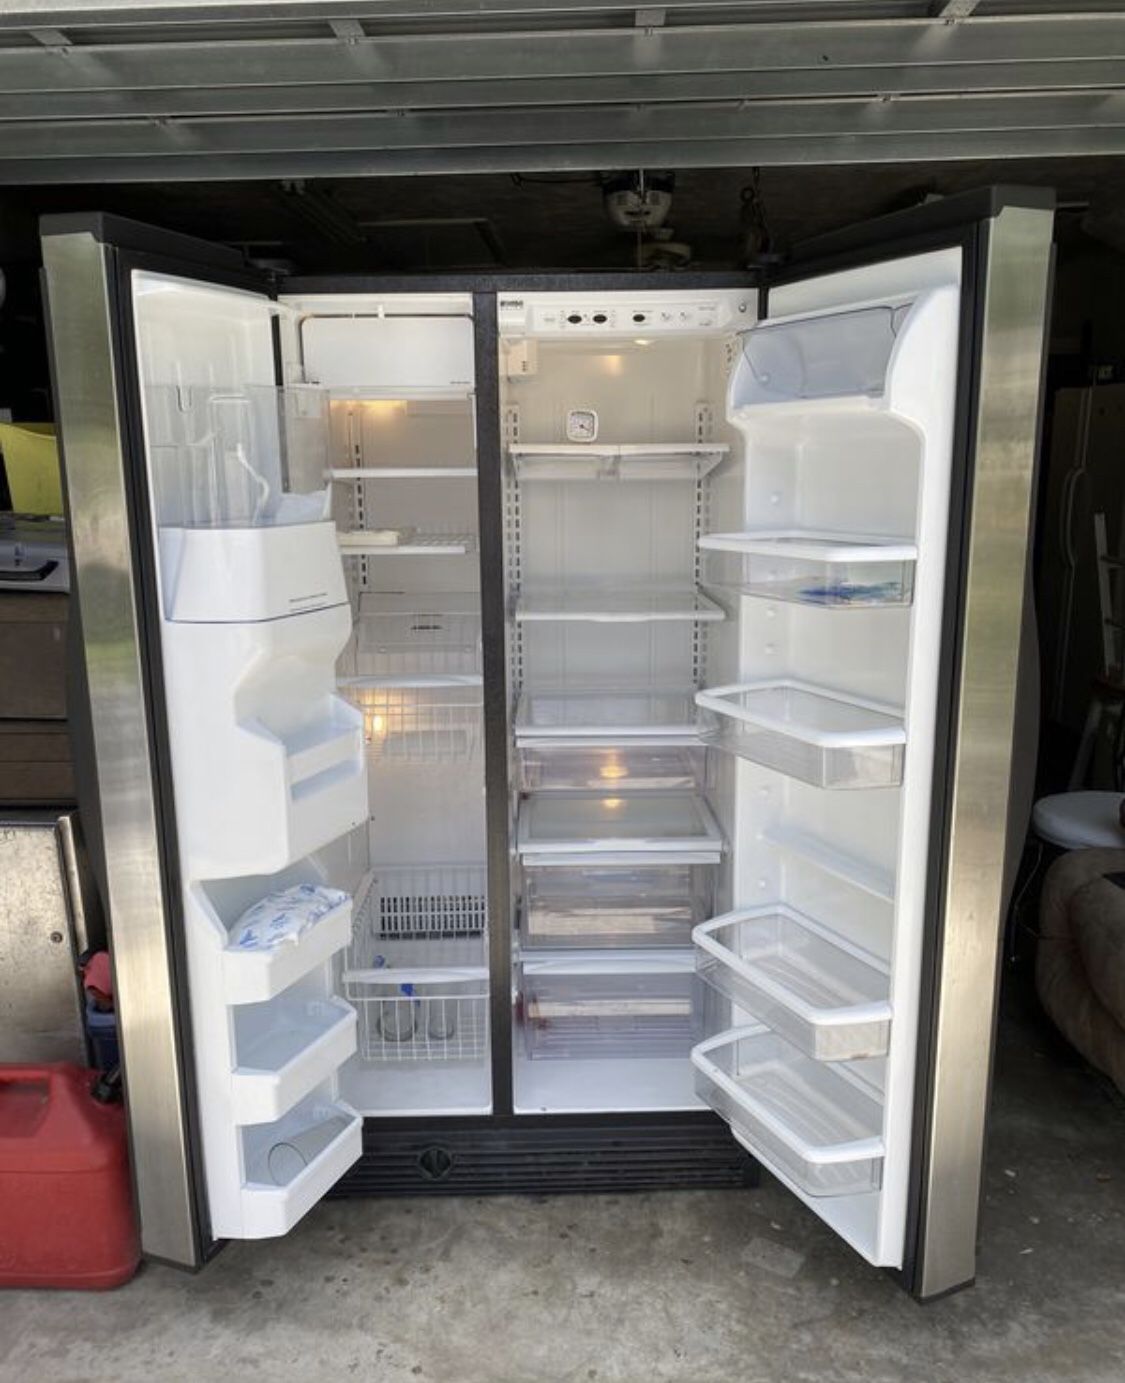 Kenmore elite side-by-side refrigerator. Needs a relay switch